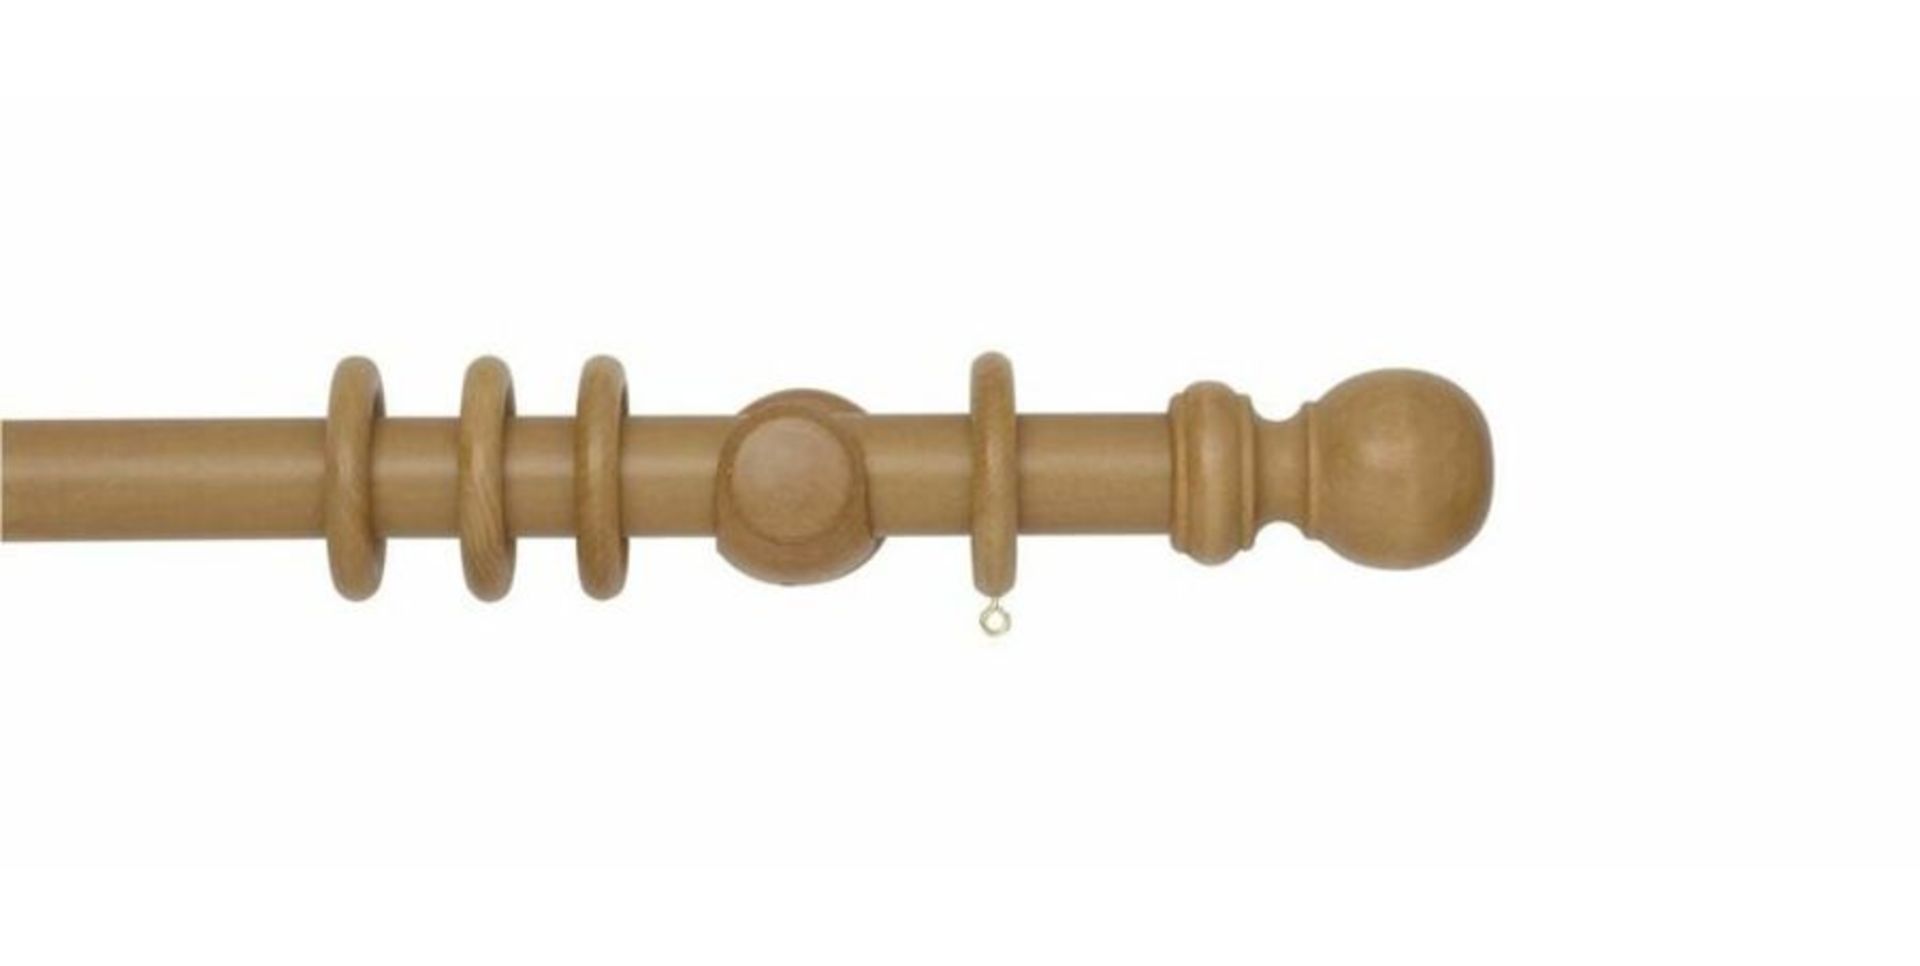 Symple Stuff, Wooden Single Curtain Pole and Hardware Set